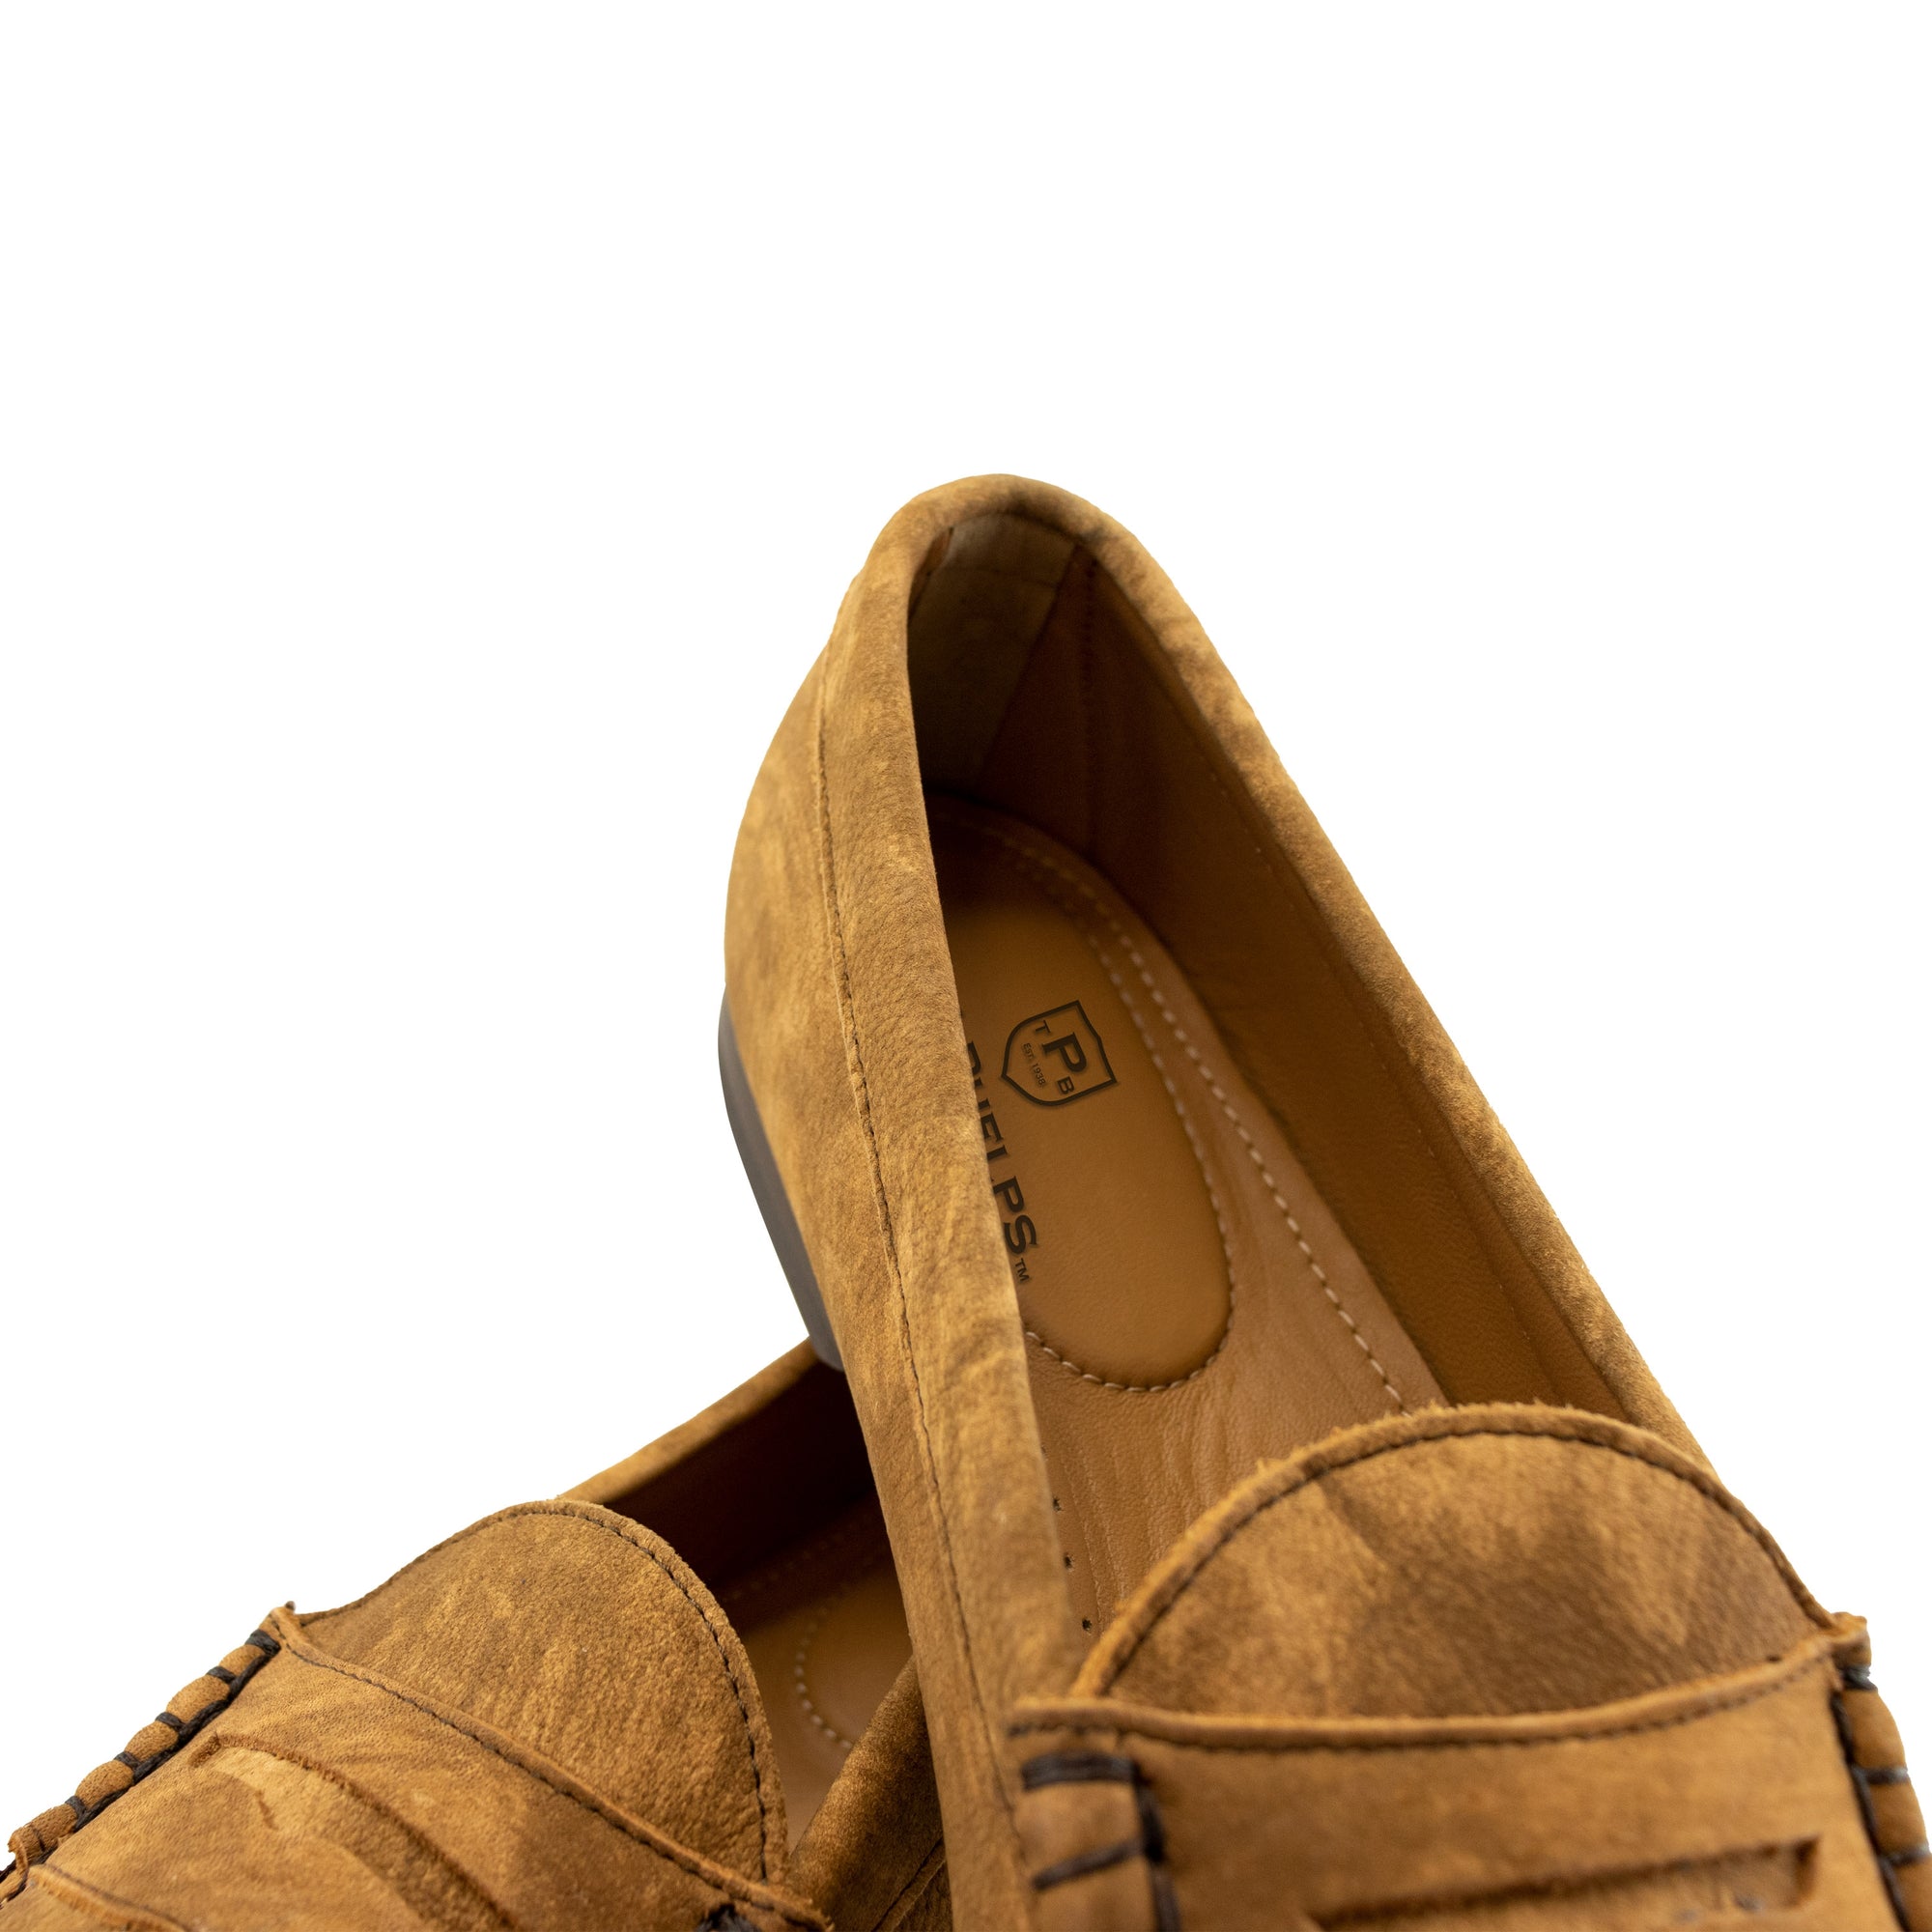 Preston Washed Calfskin Penny Loafer in Tan by T.B. Phelps